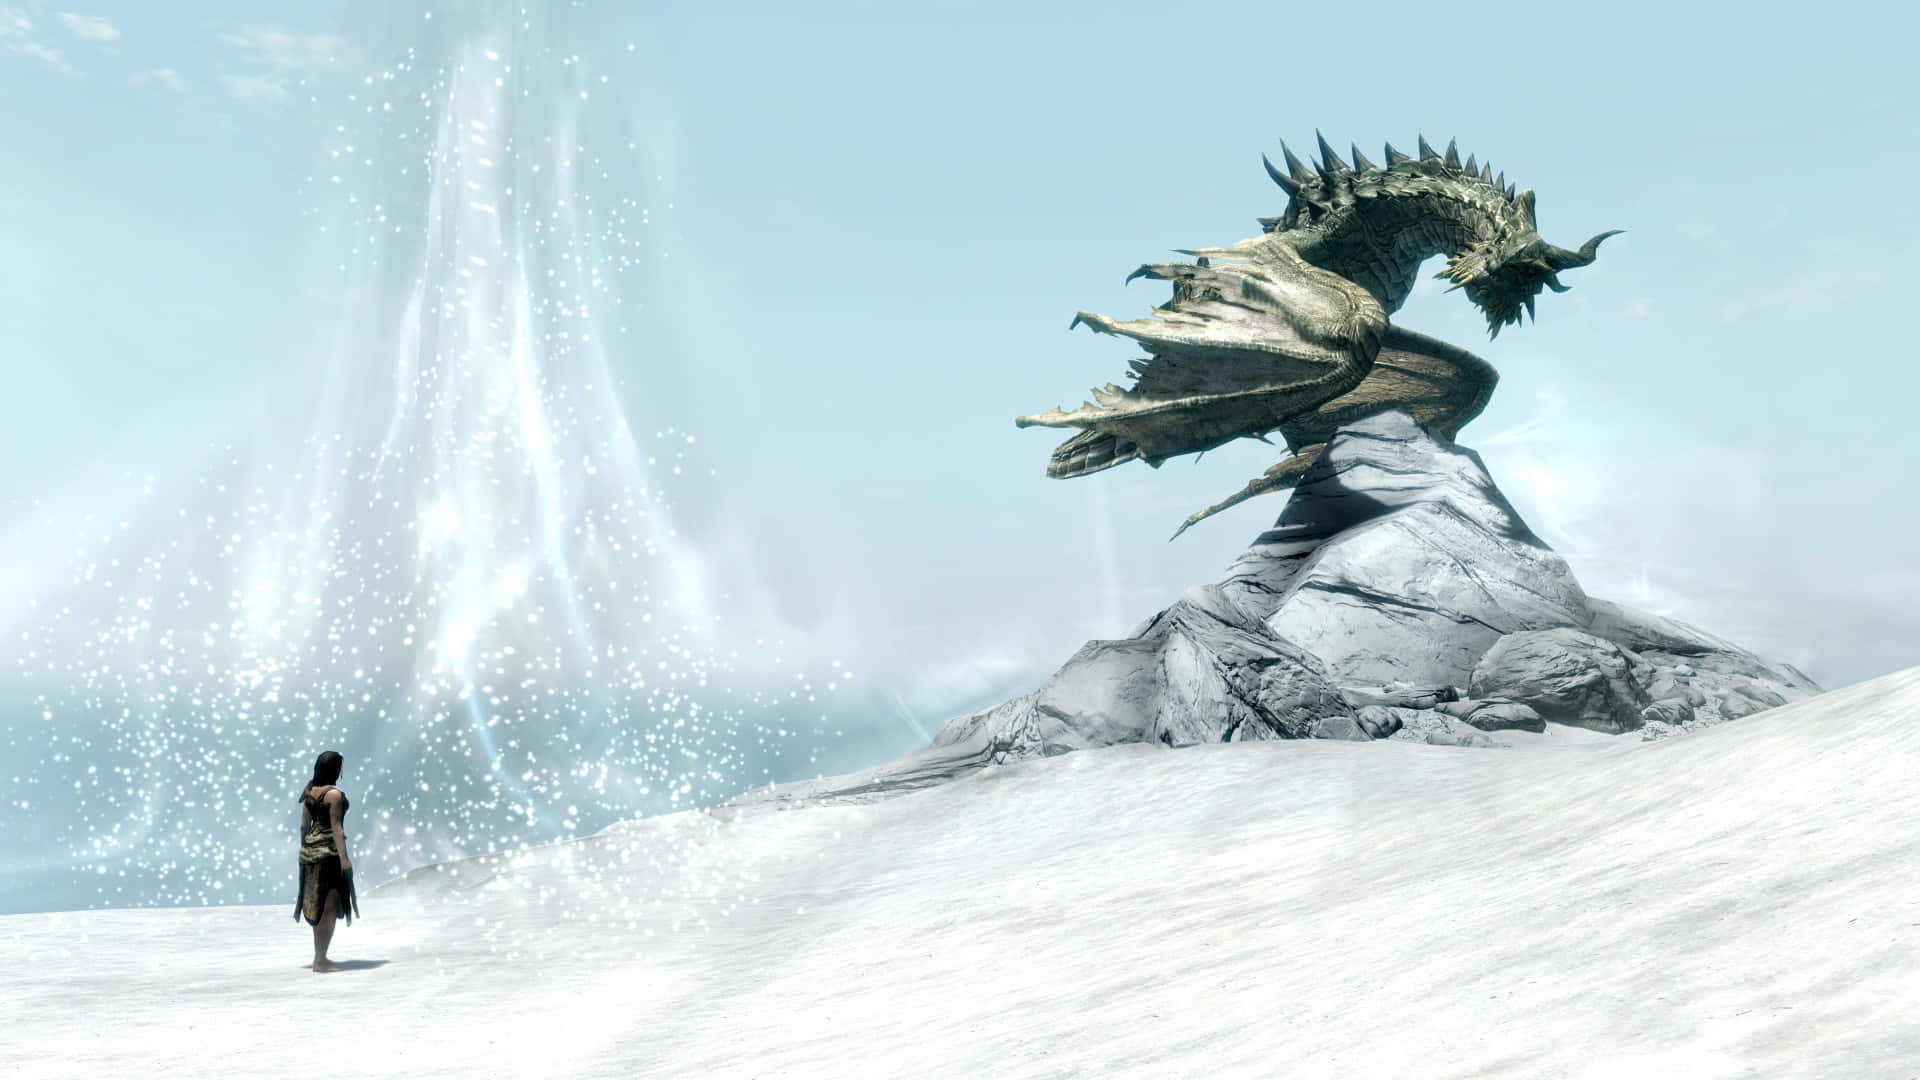 The Mighty Paarthurnax atop the Throat of the World in Skyrim Wallpaper